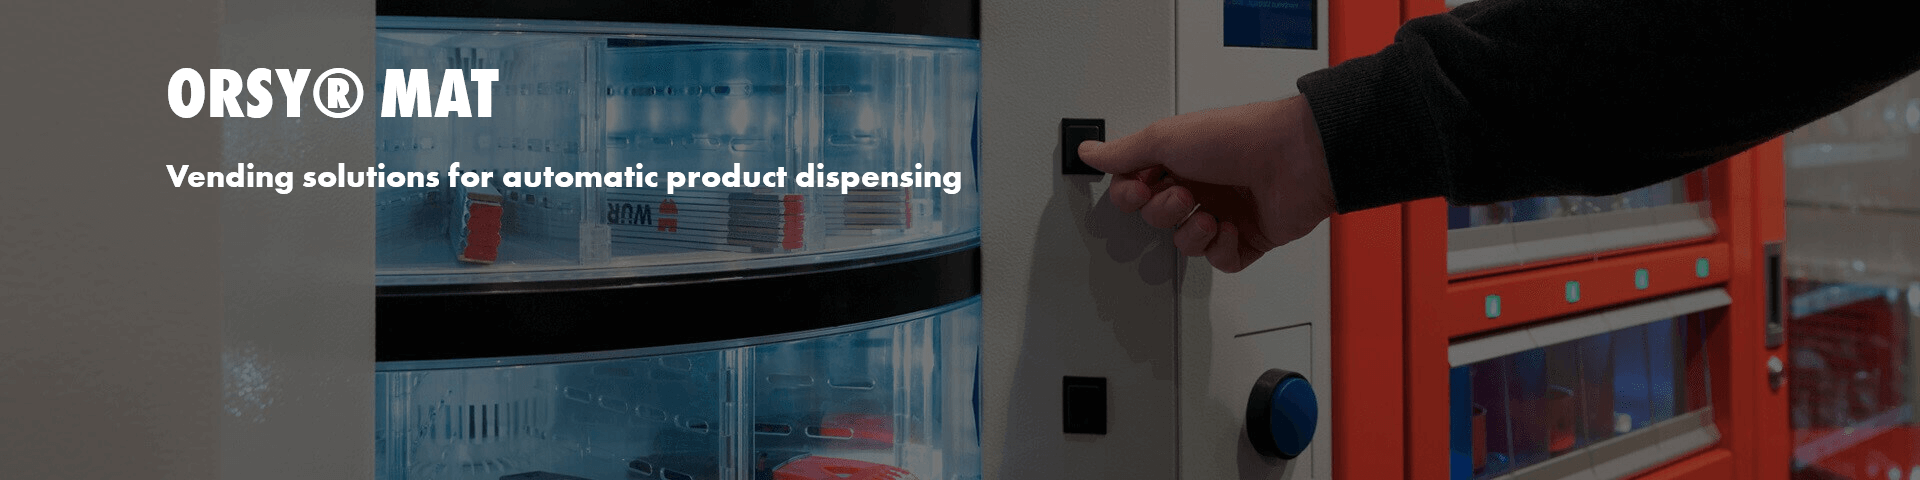 ORSY®Mat Product Vending Machines